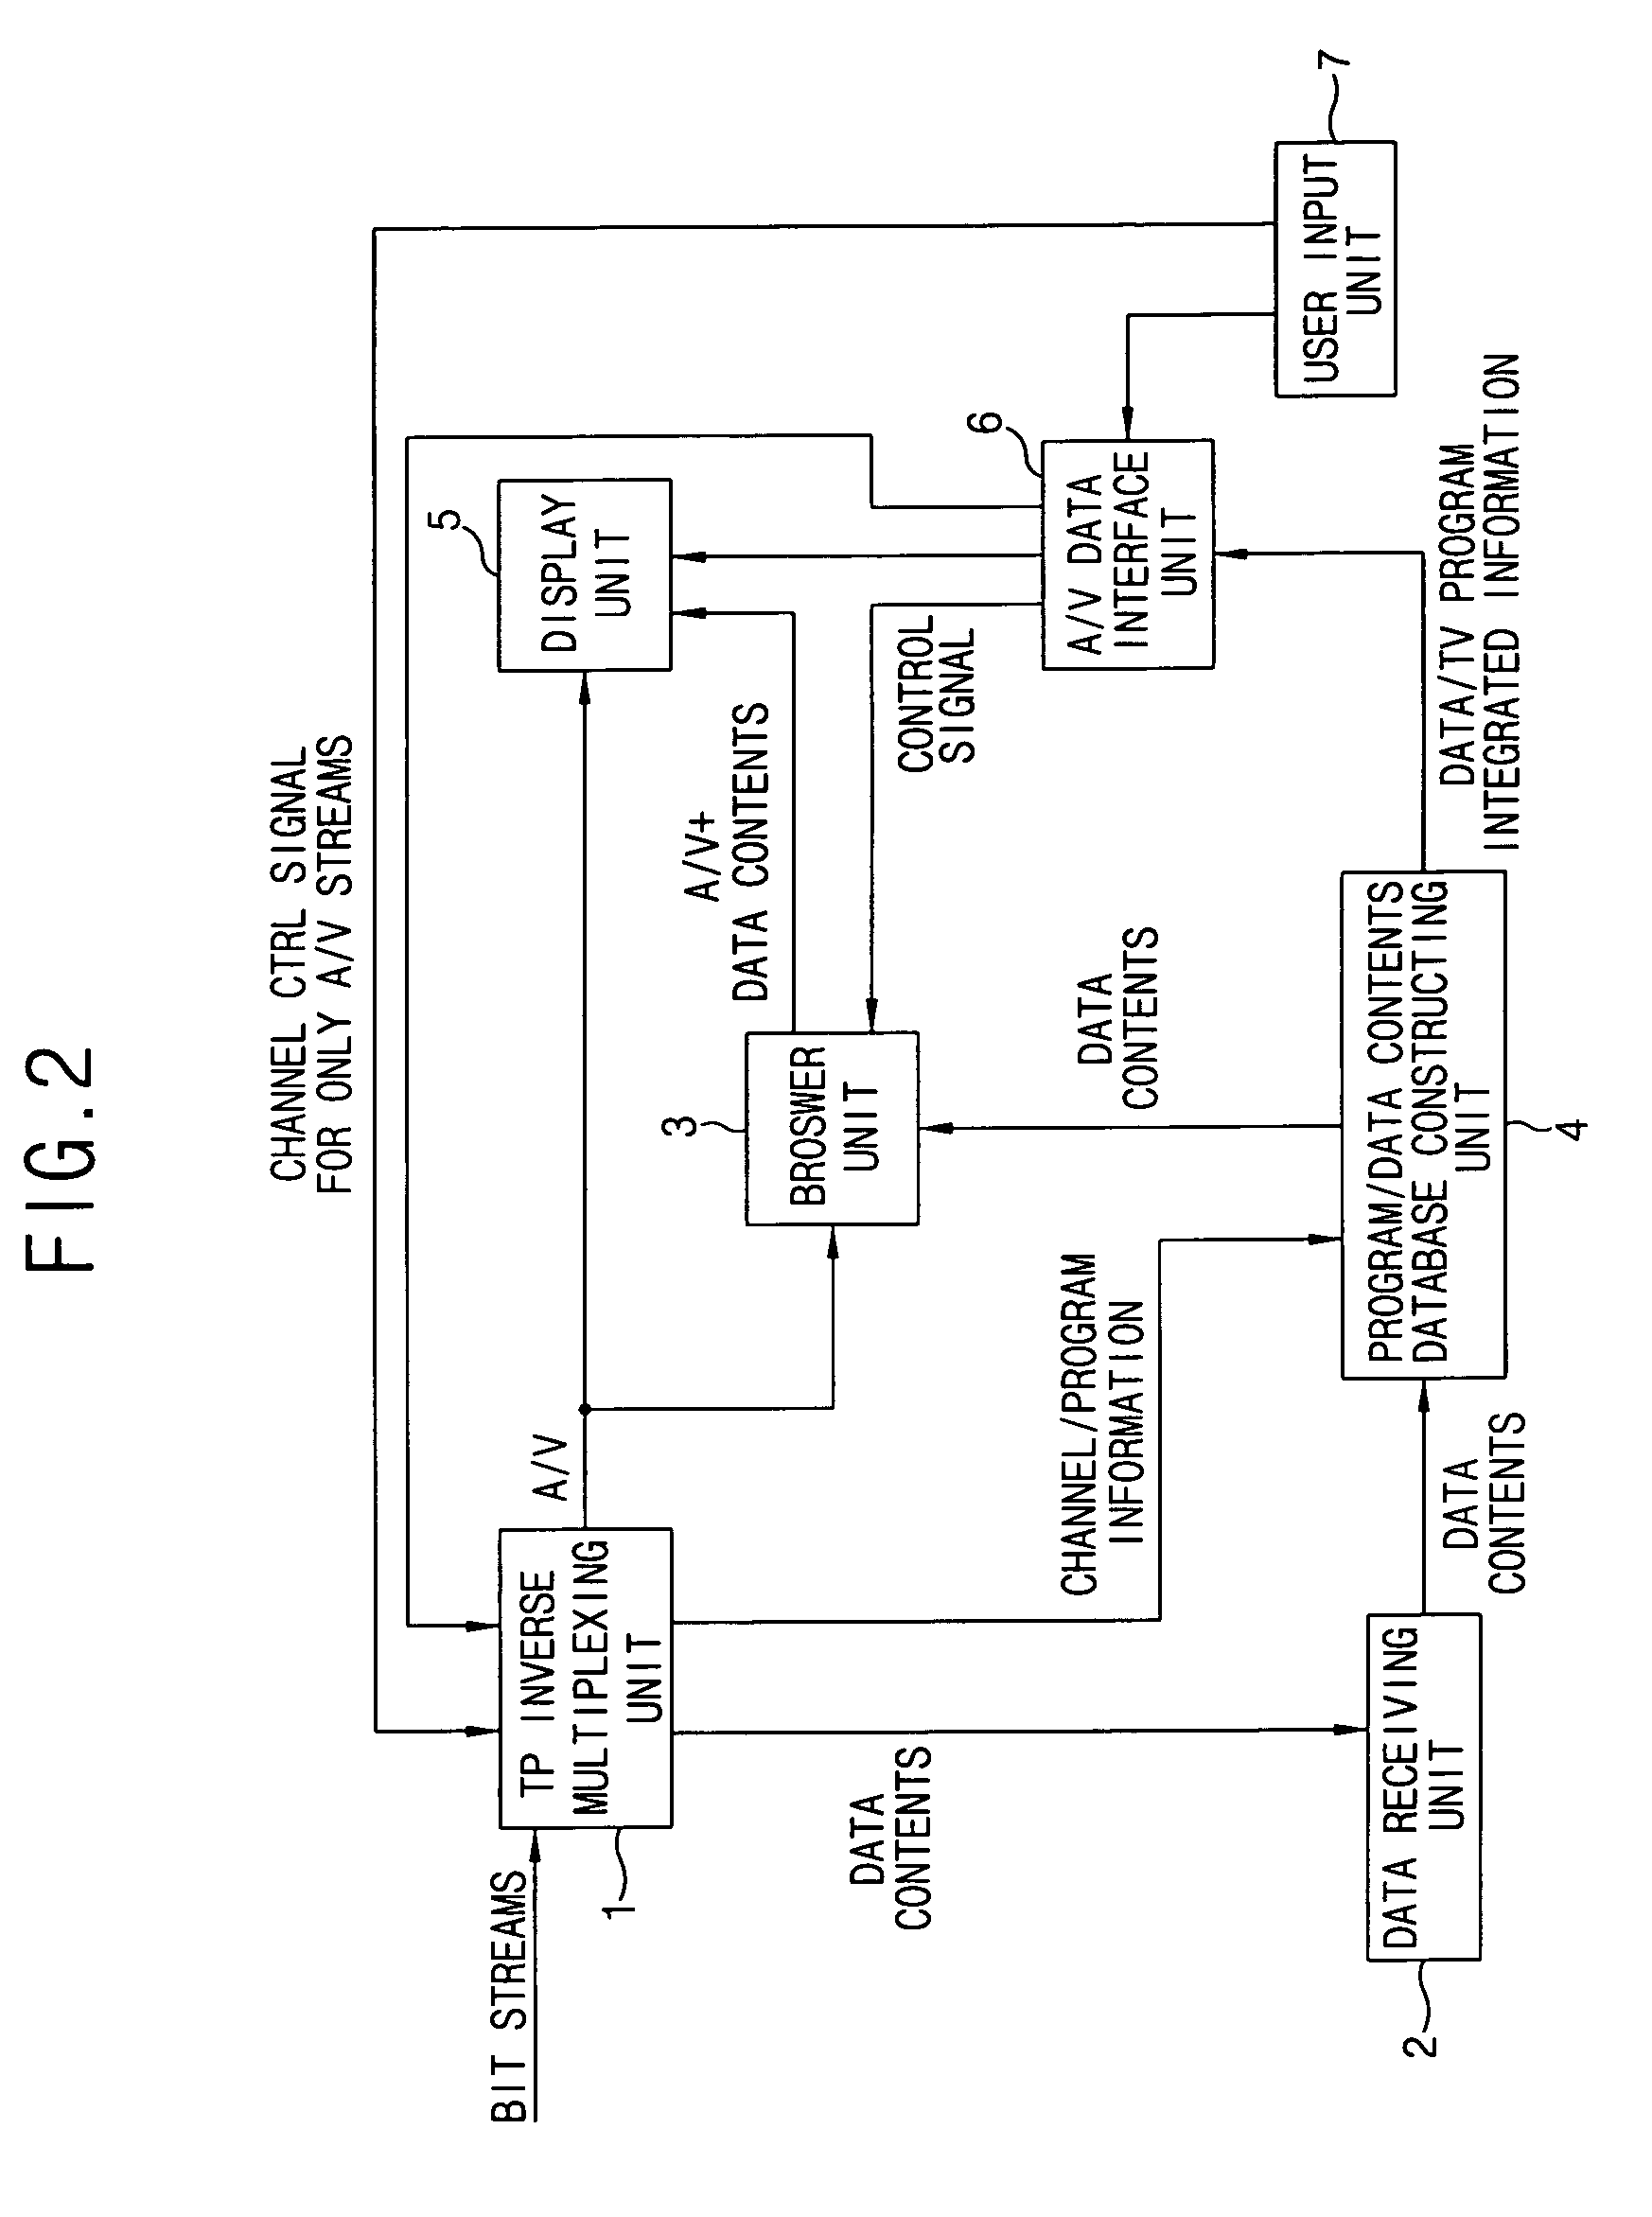 Data contents processing method and apparatus